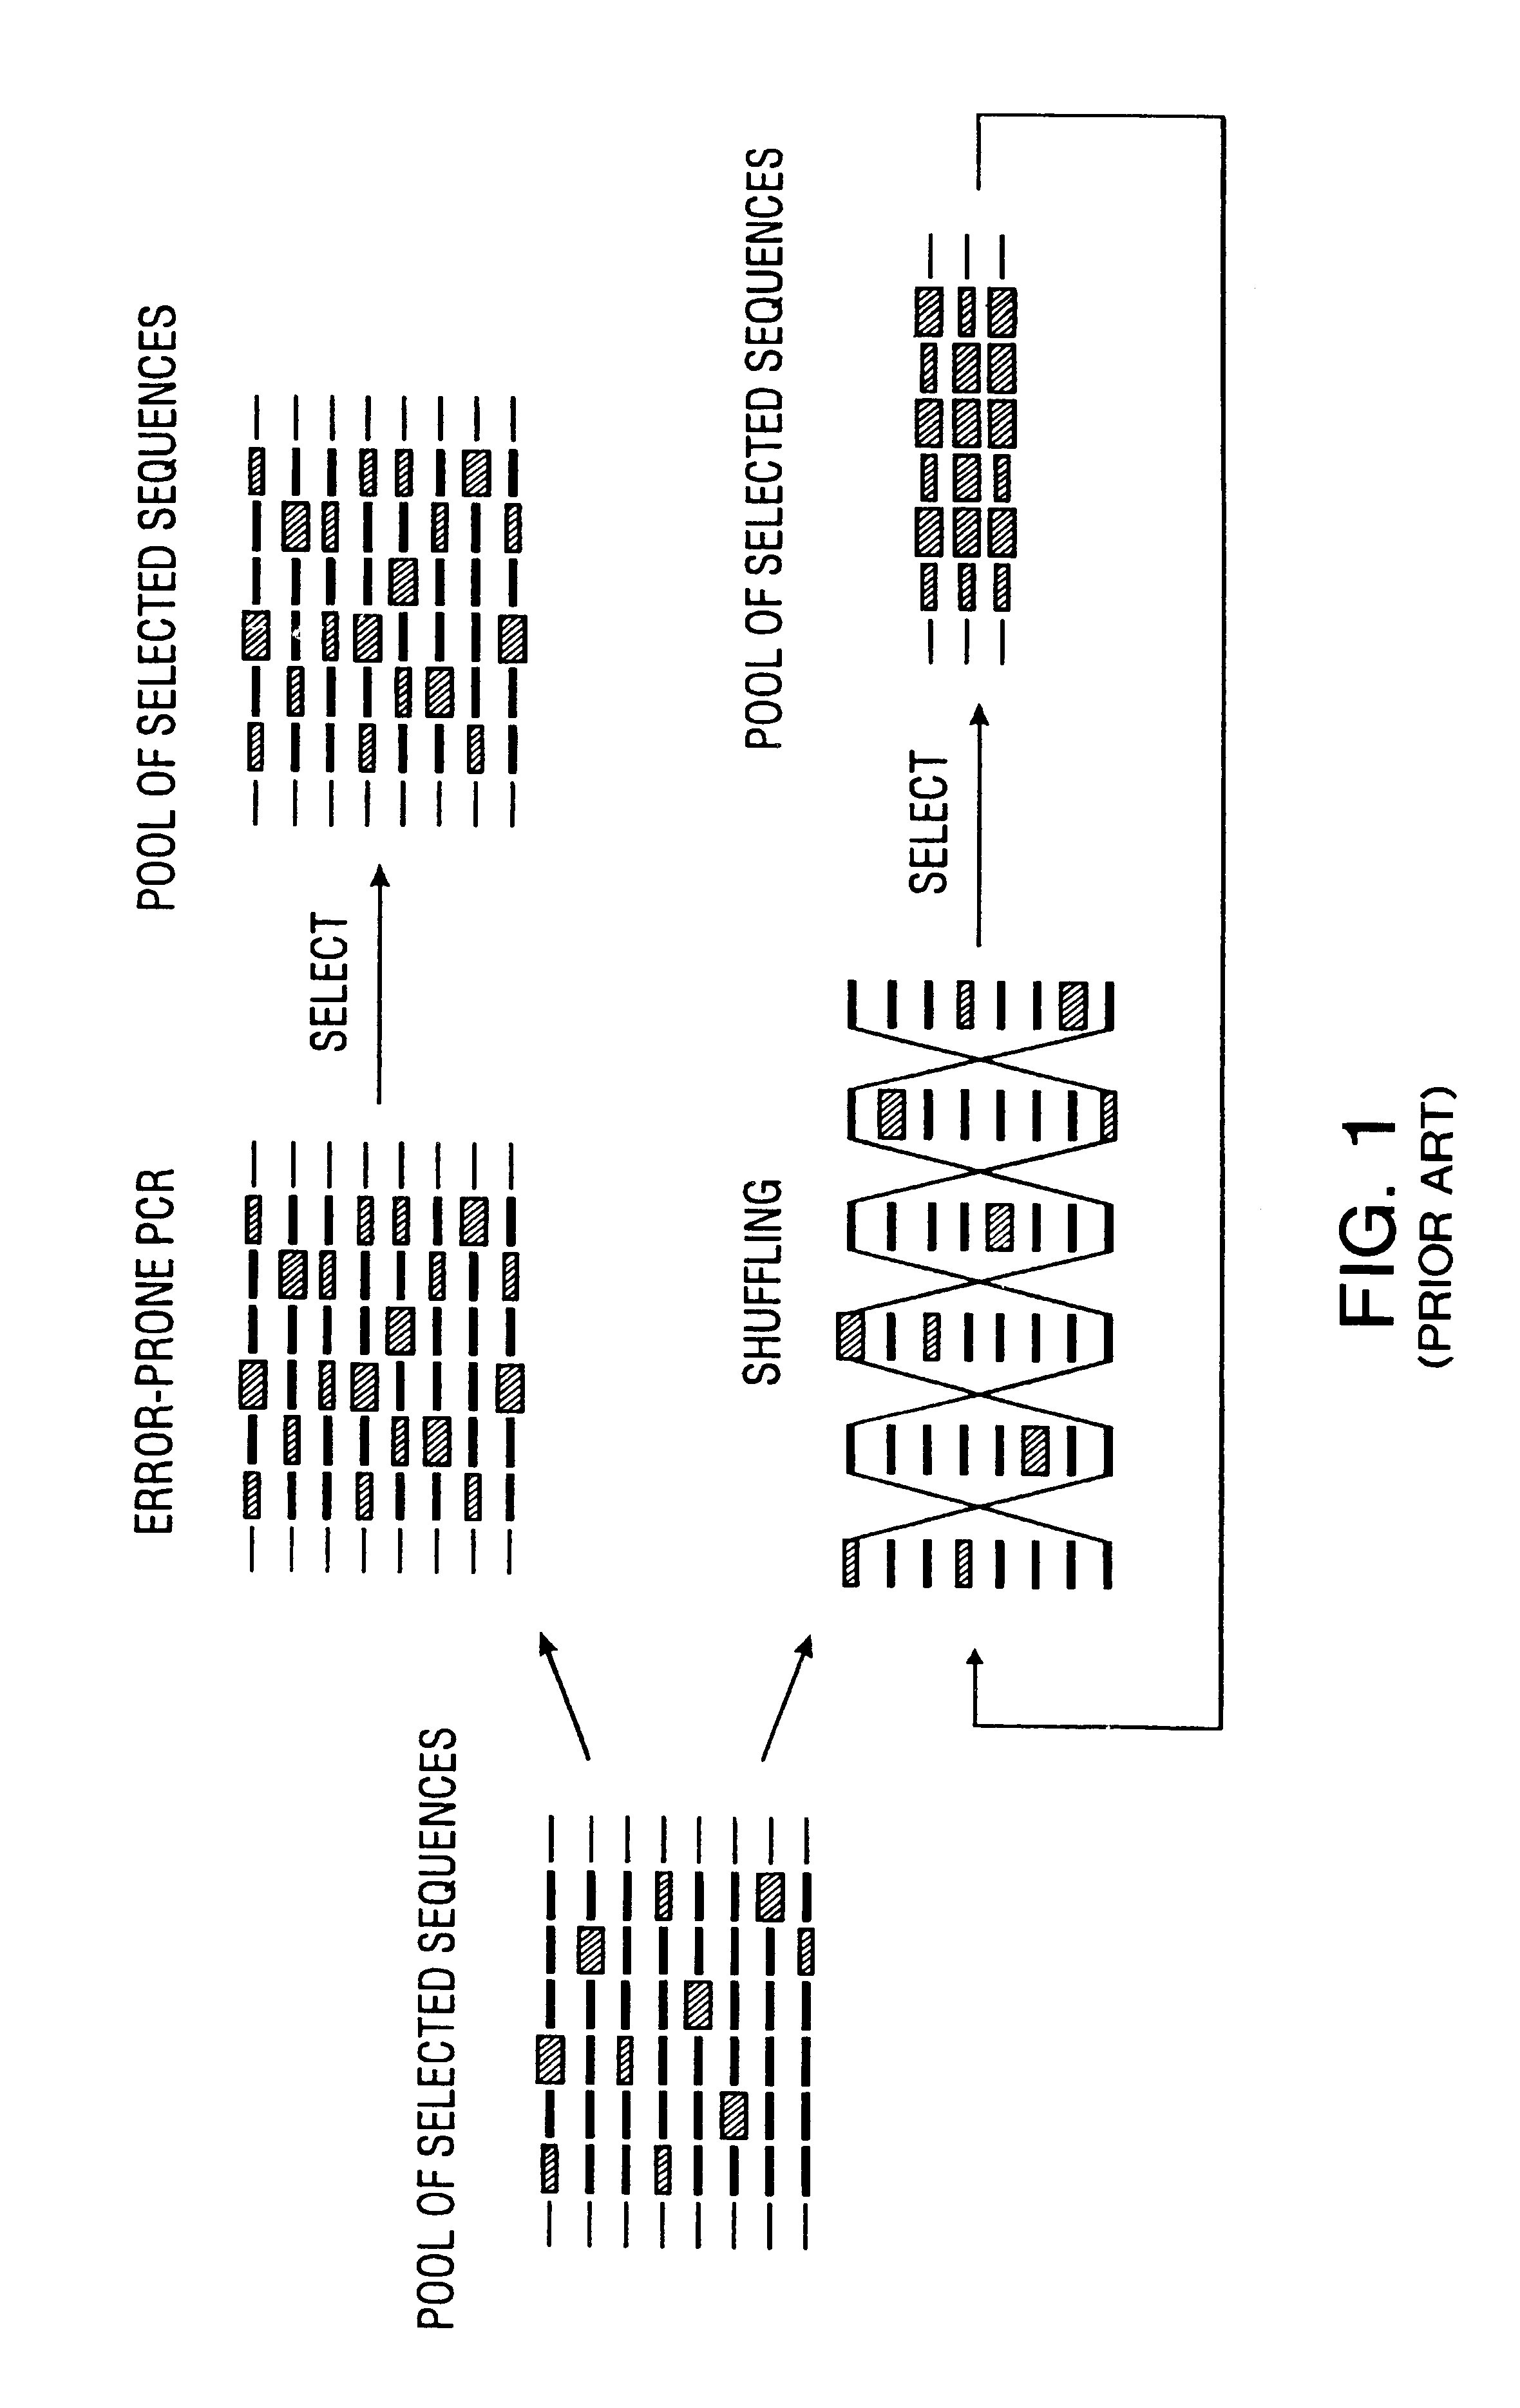 Method of DNA shuffling with polynucleotides produced by blocking or interrupting a synthesis or amplification process